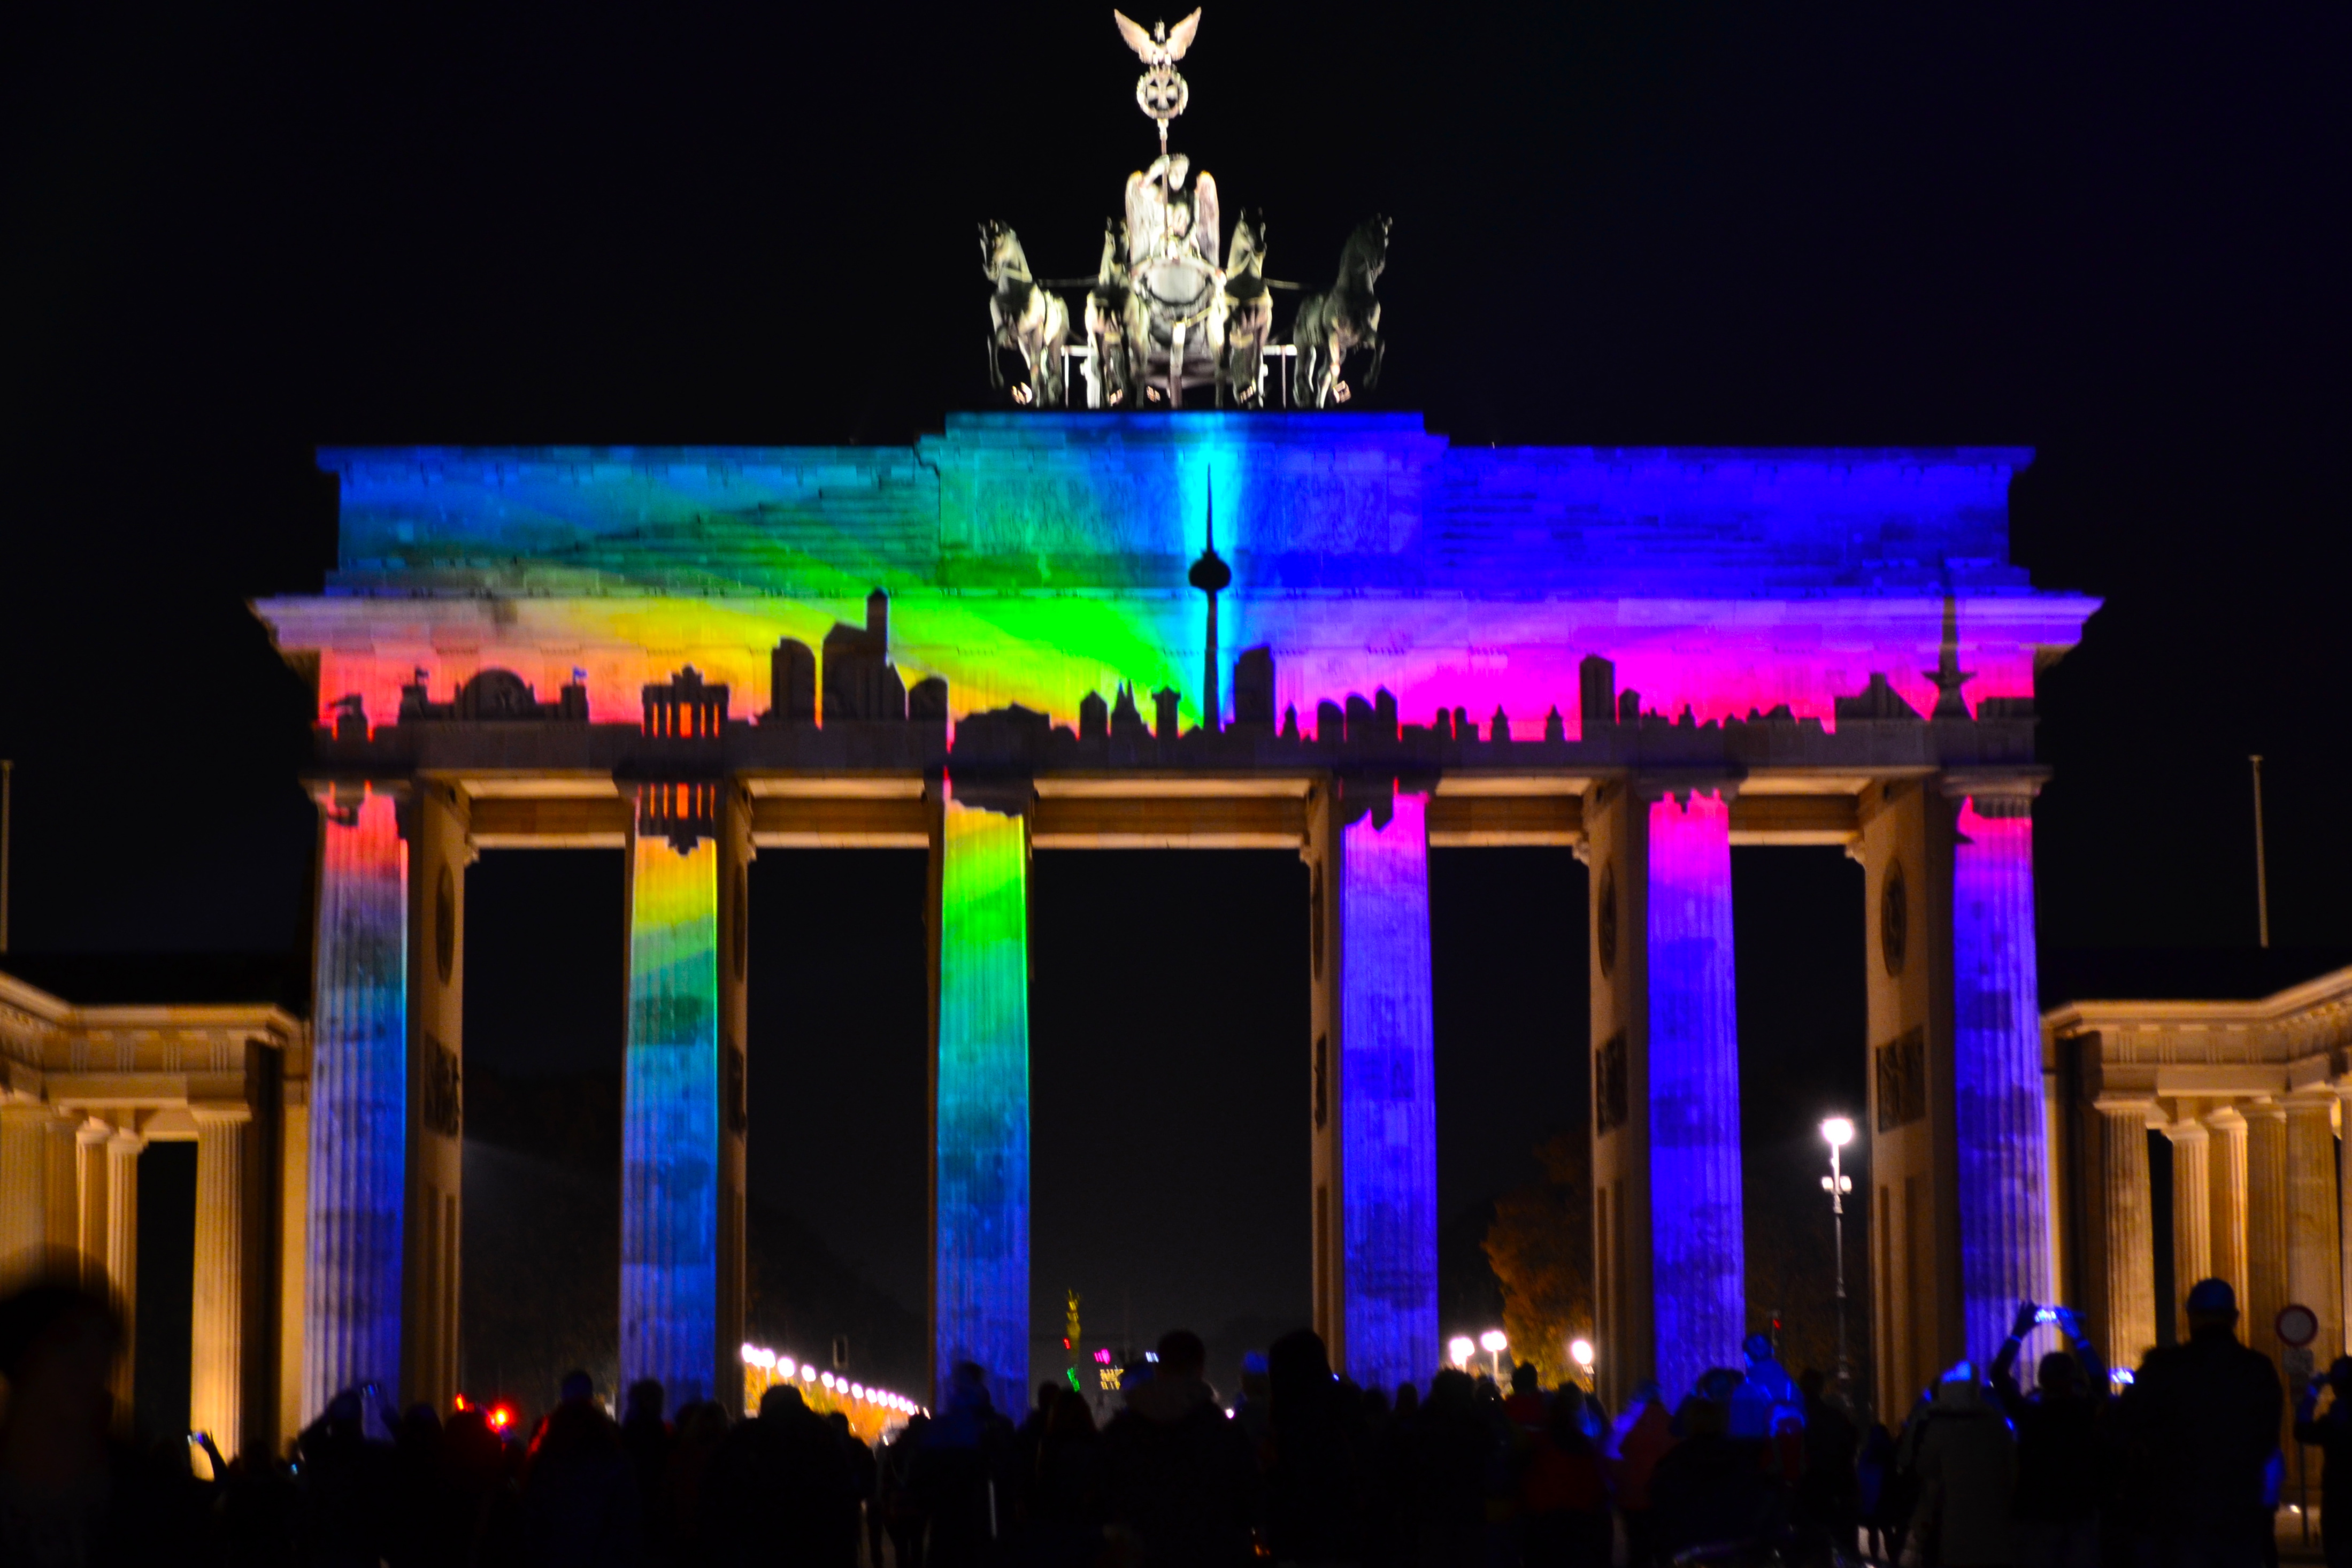 Festival Of Lights - Berlin Backgrounds, Compatible - PC, Mobile, Gadgets| 4398x2932 px